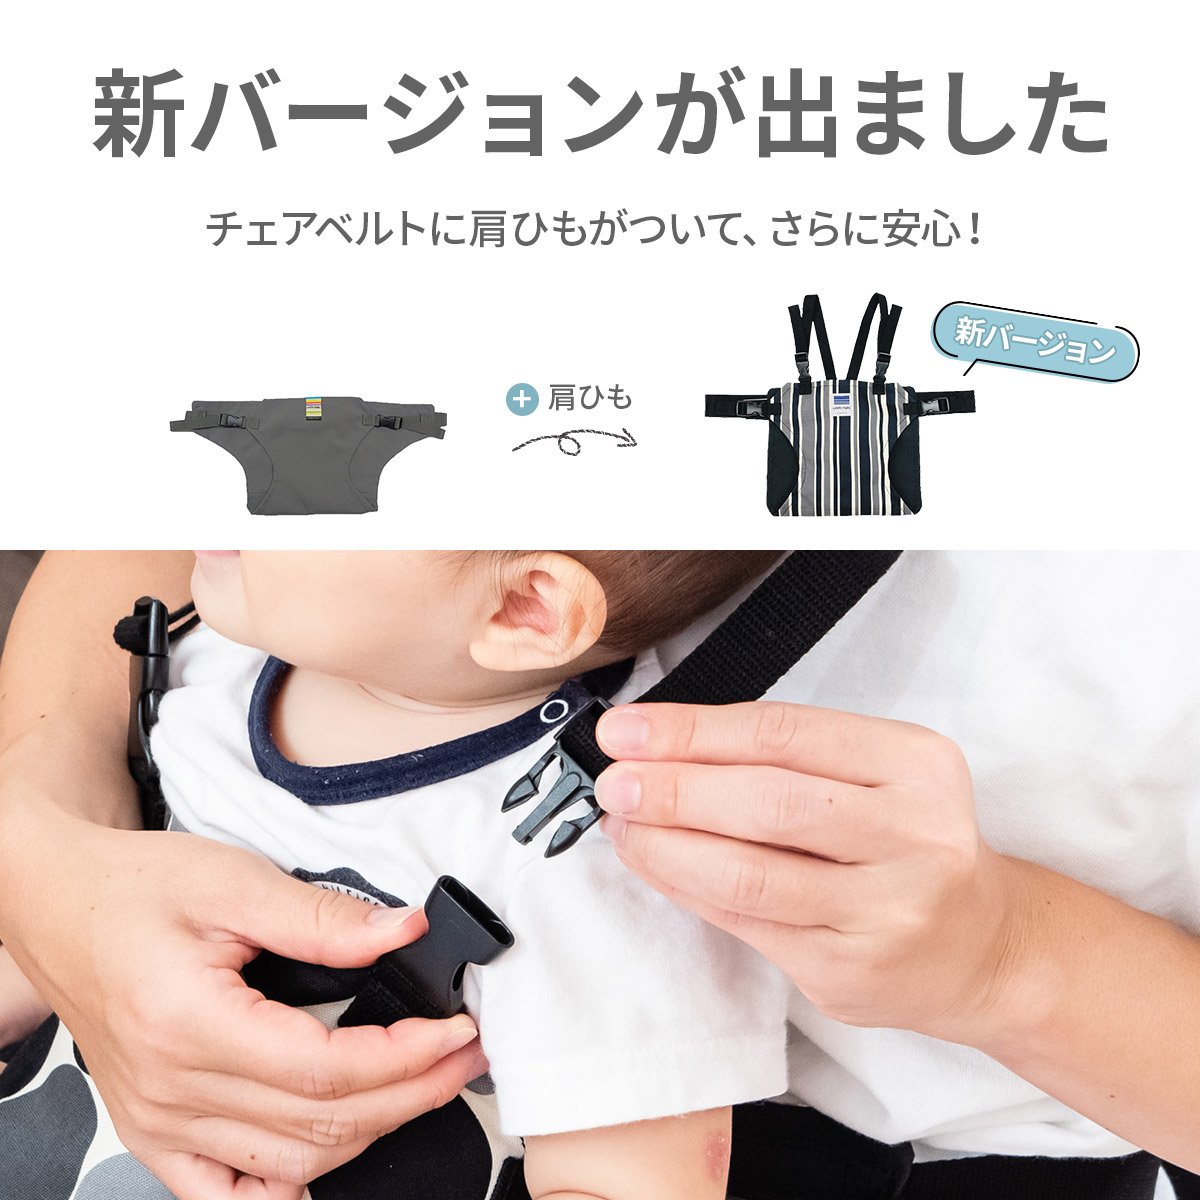 kyali free chair belt Hold shoulder baby shoulder belt baby made in Japan . seat . assistance chair chair rotation . prevention baby chair star pattern regular goods support belt 